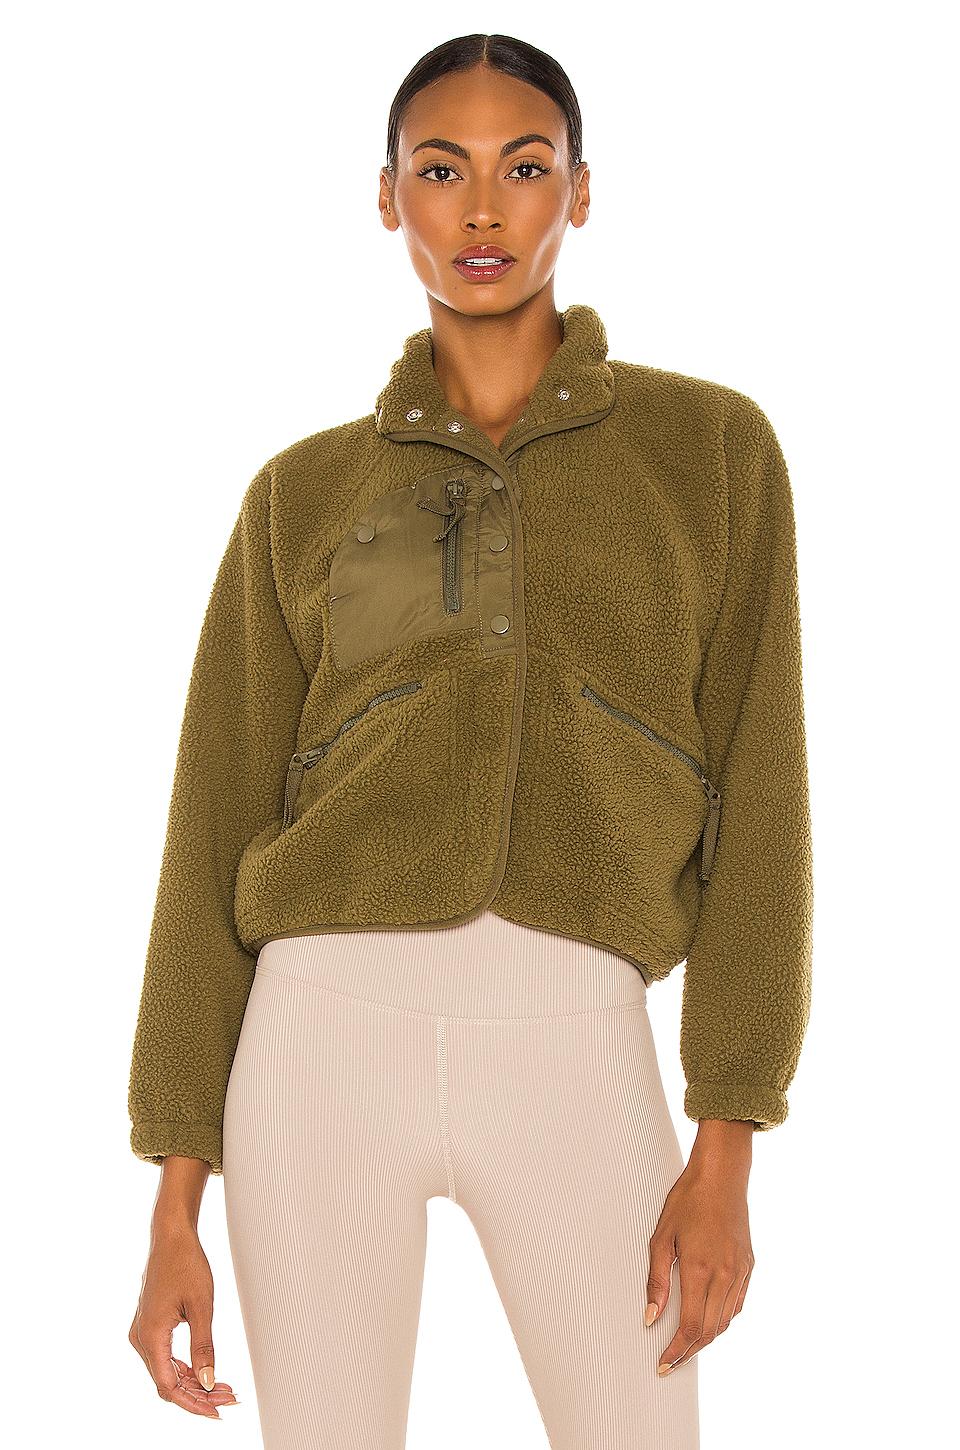 Free People X Fp Movement Hit The Slopes Jacket in Army (Green) - Lyst